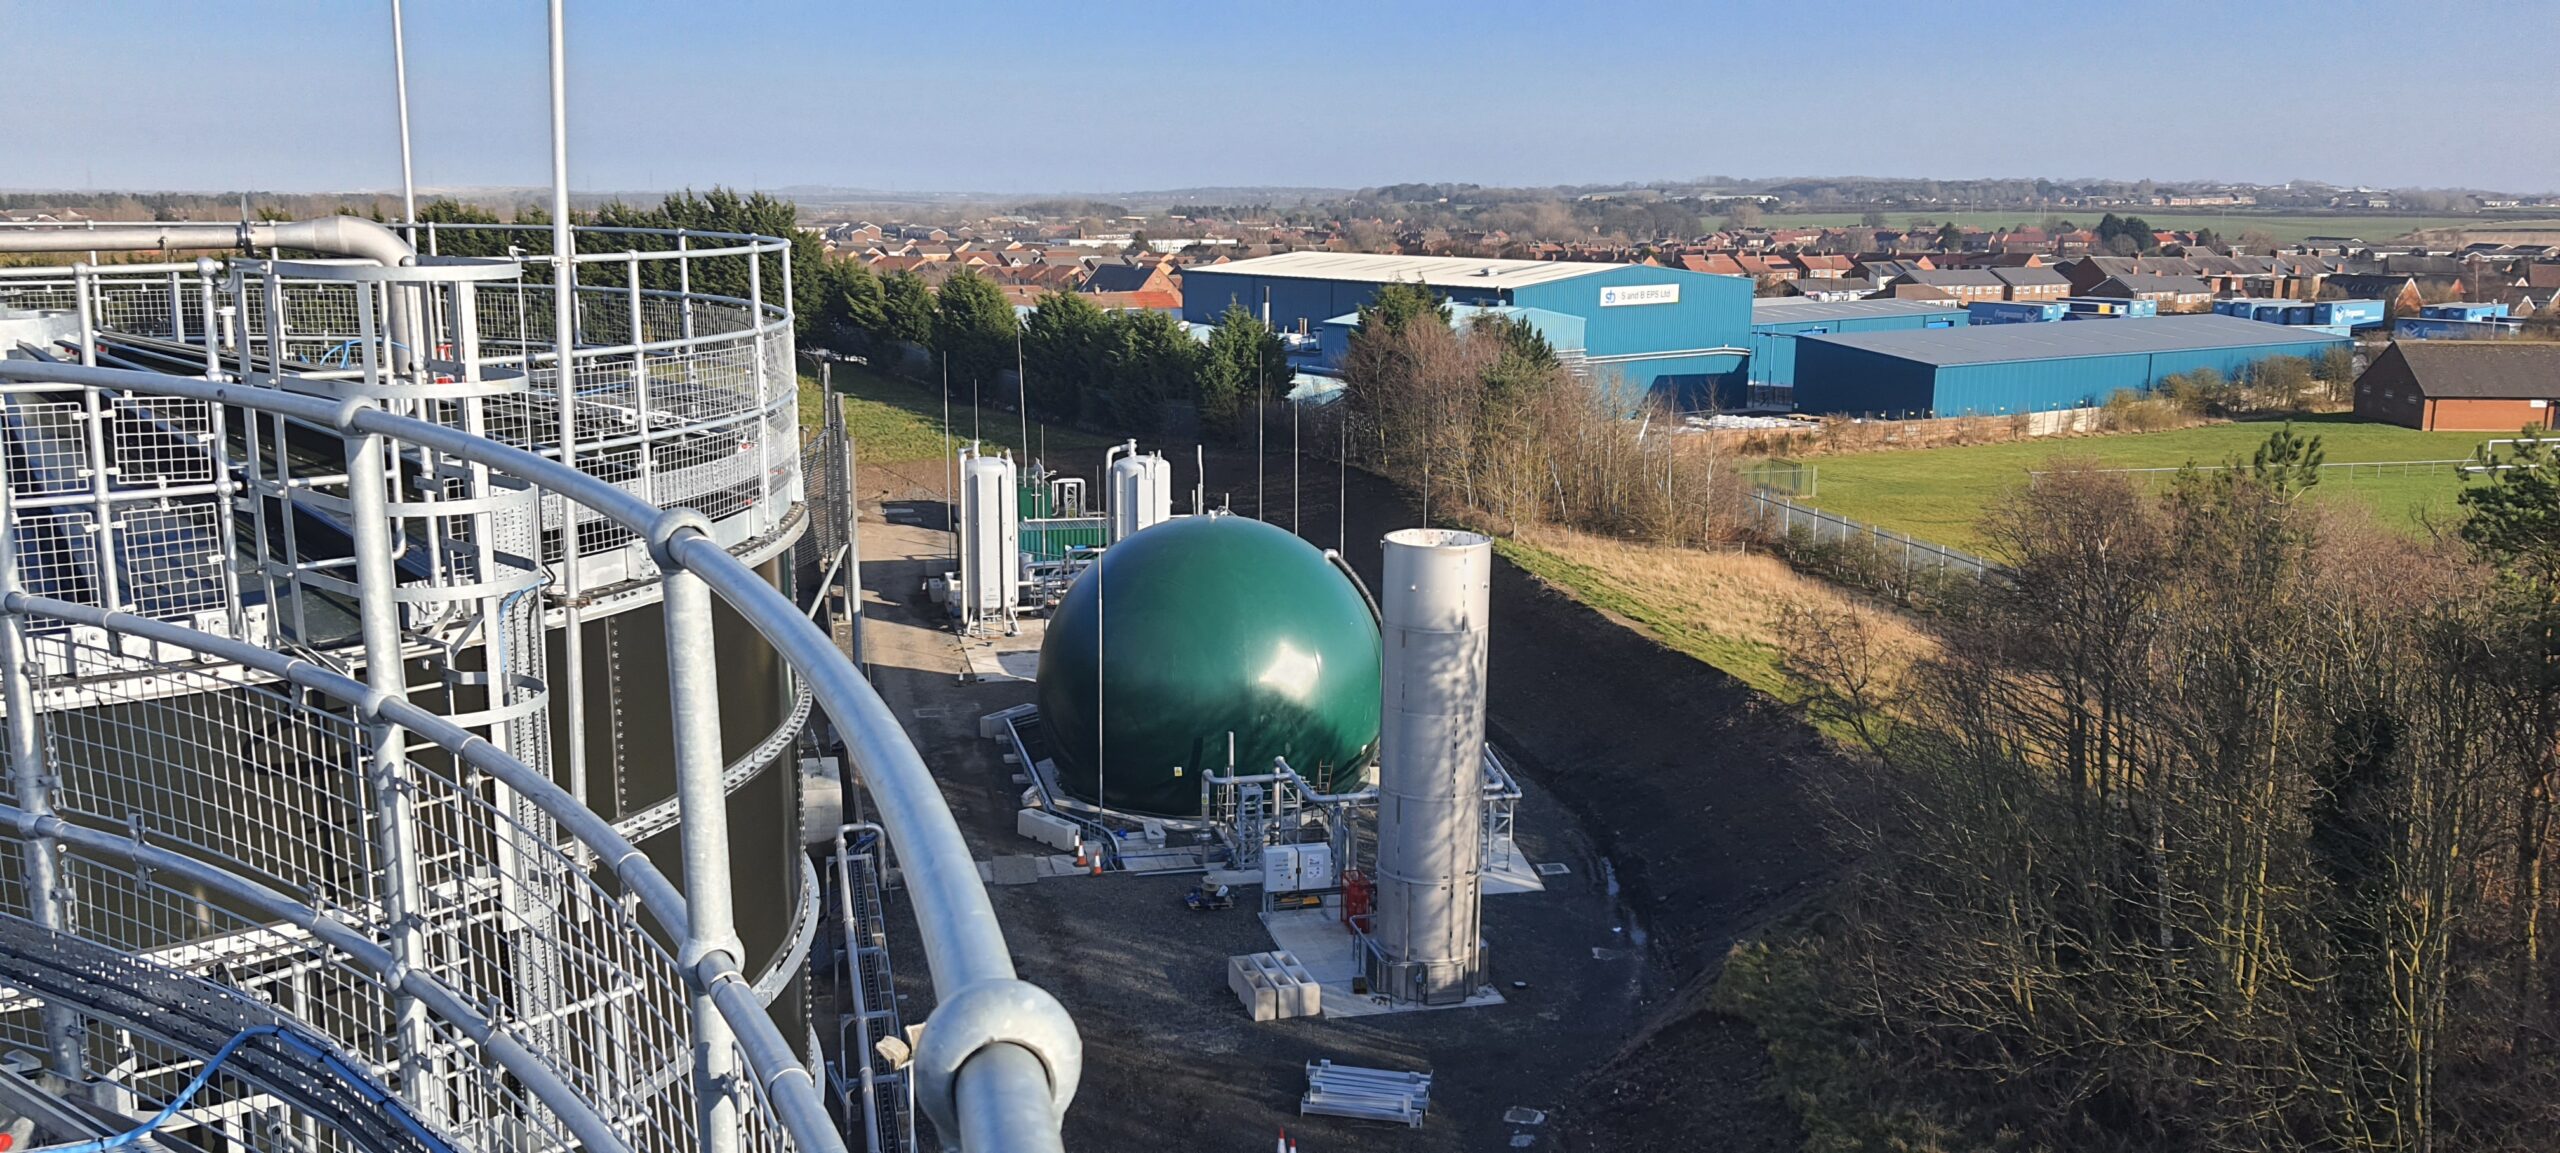 MEMBER NEWS: Synergie Environ works with Sterling Pharma Solutions, in a UK first, converting waste solvents to low carbon gas